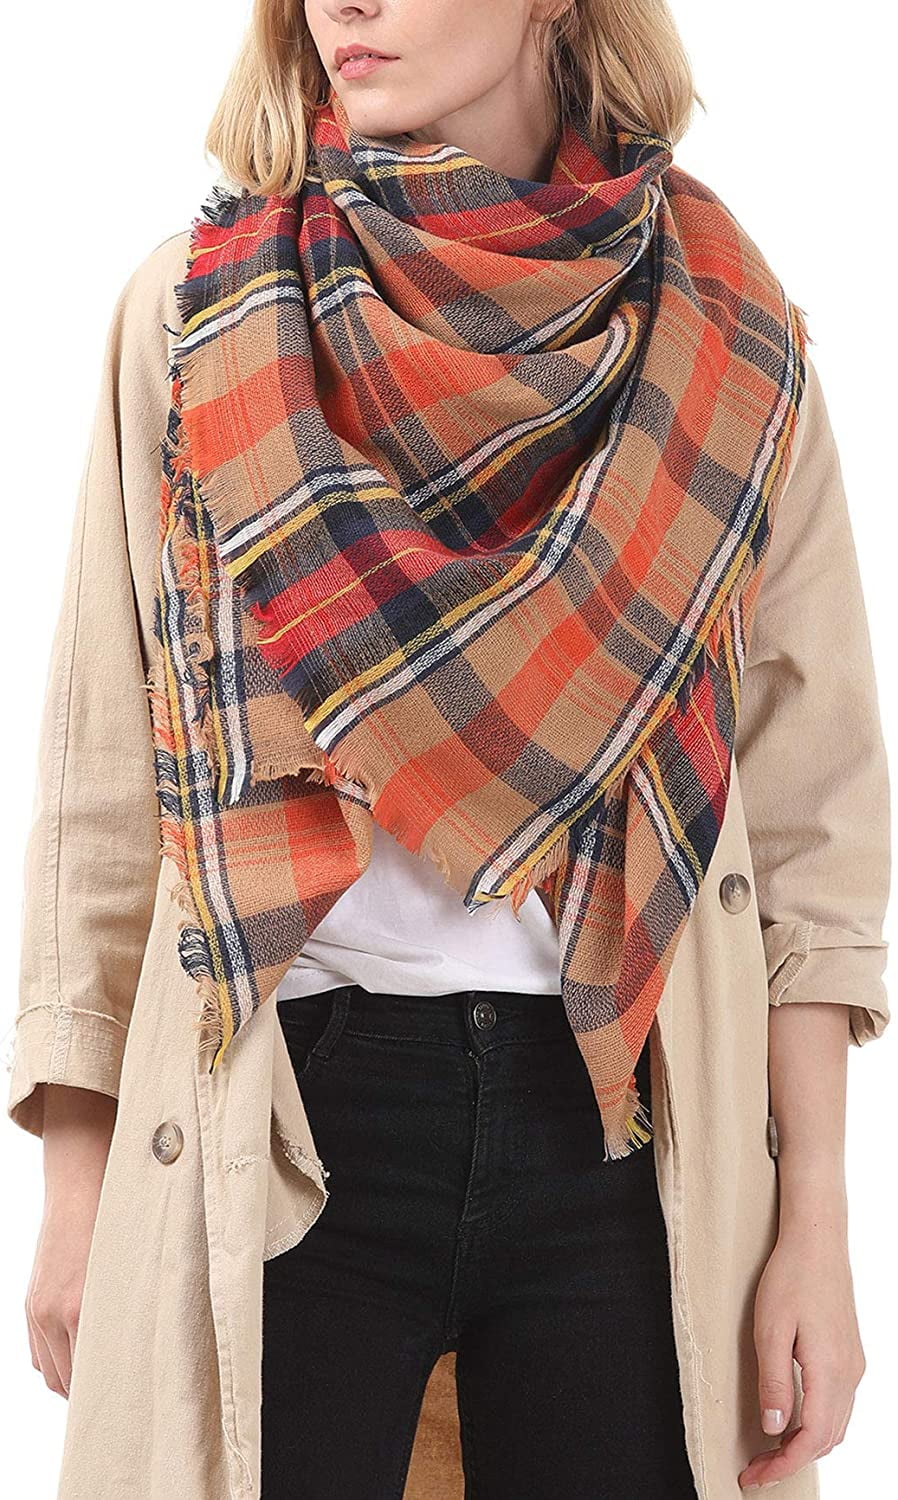 Large pashmina shawl Checkered cashmere scarf for women Oversized stole Tartan blanket scarf Wool wrap Birthday Christmas gifts for her